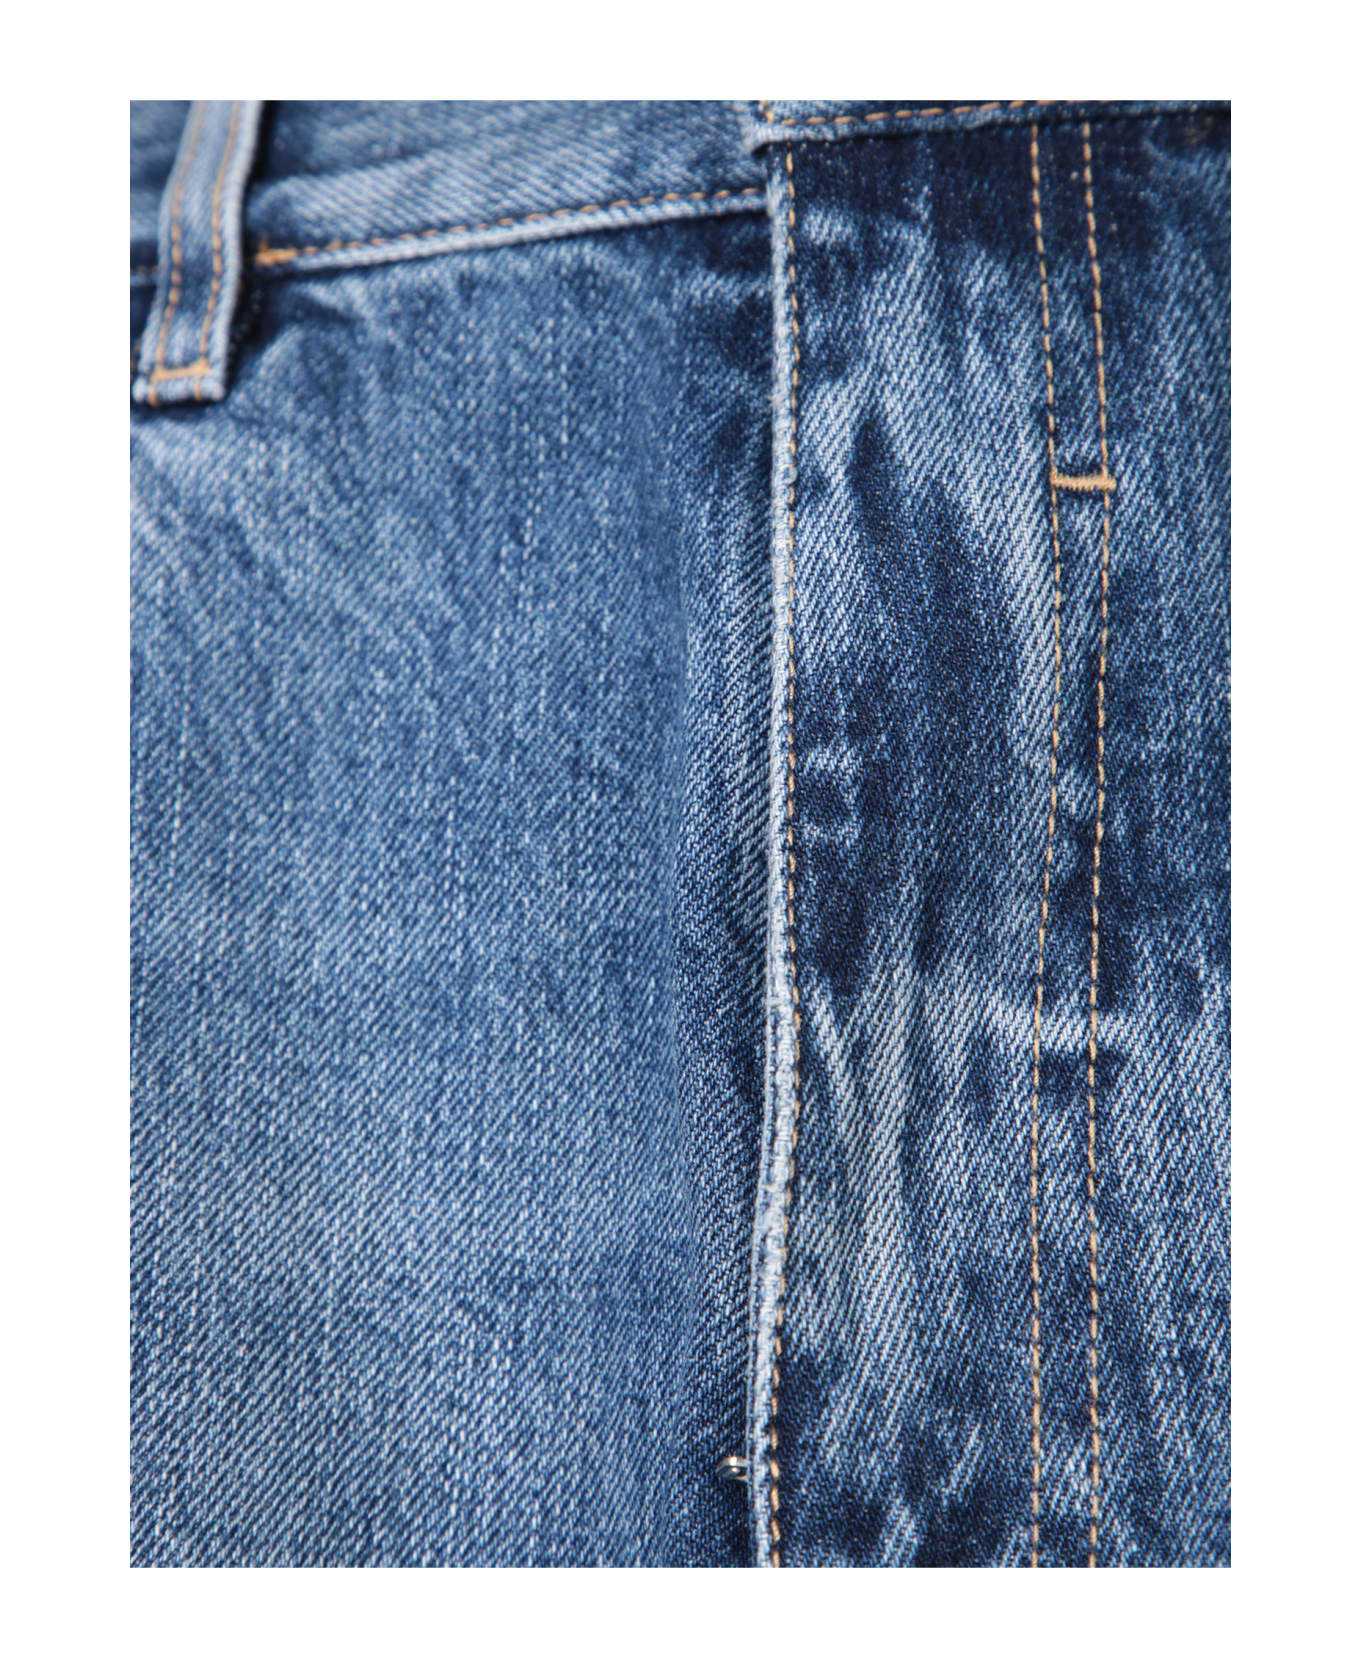 Givenchy Straight Dark Blue Jeans - Blue